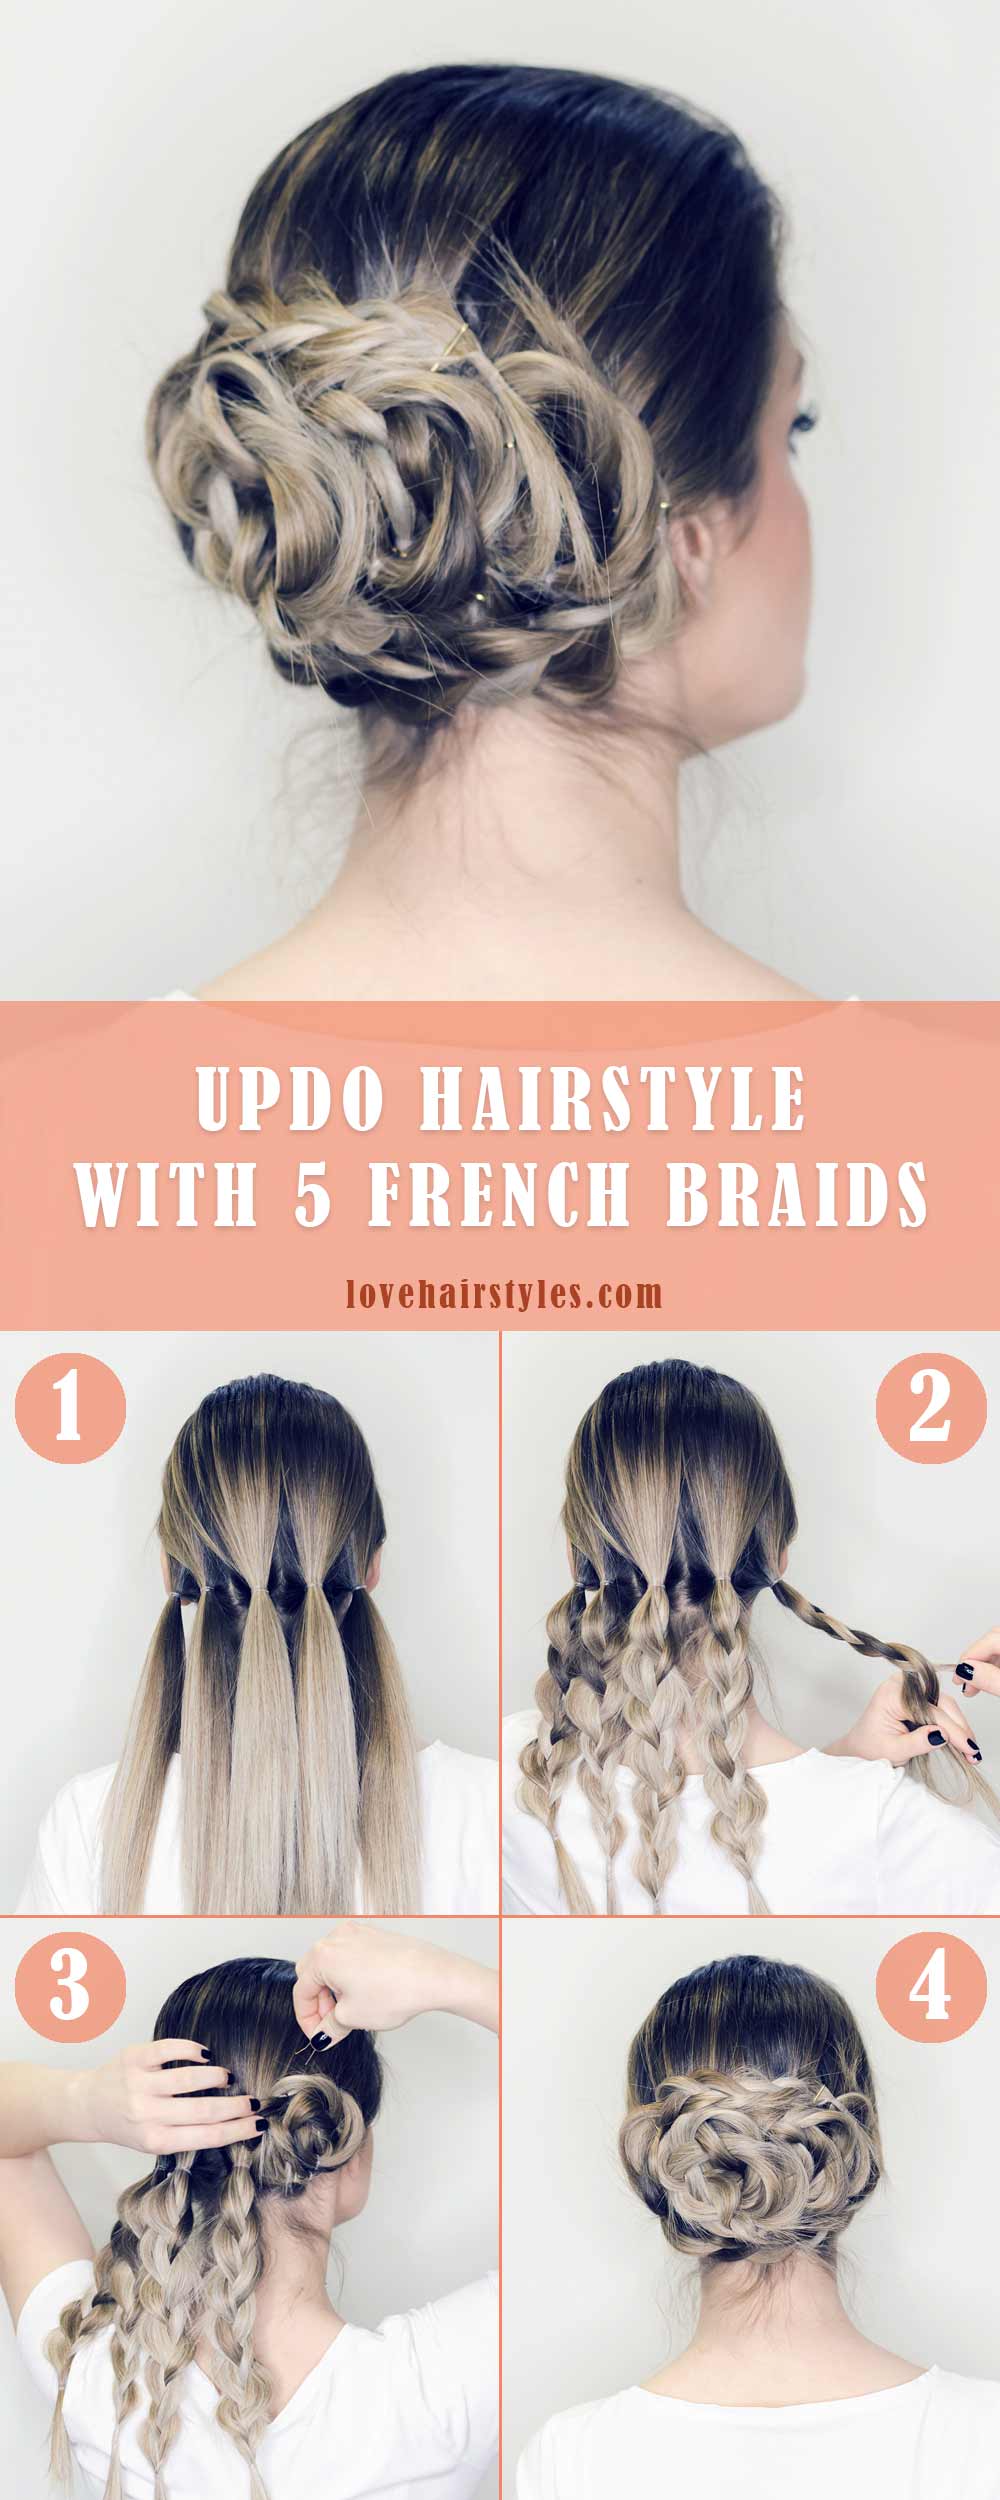 Updo Hairstyle With 5 French Braids